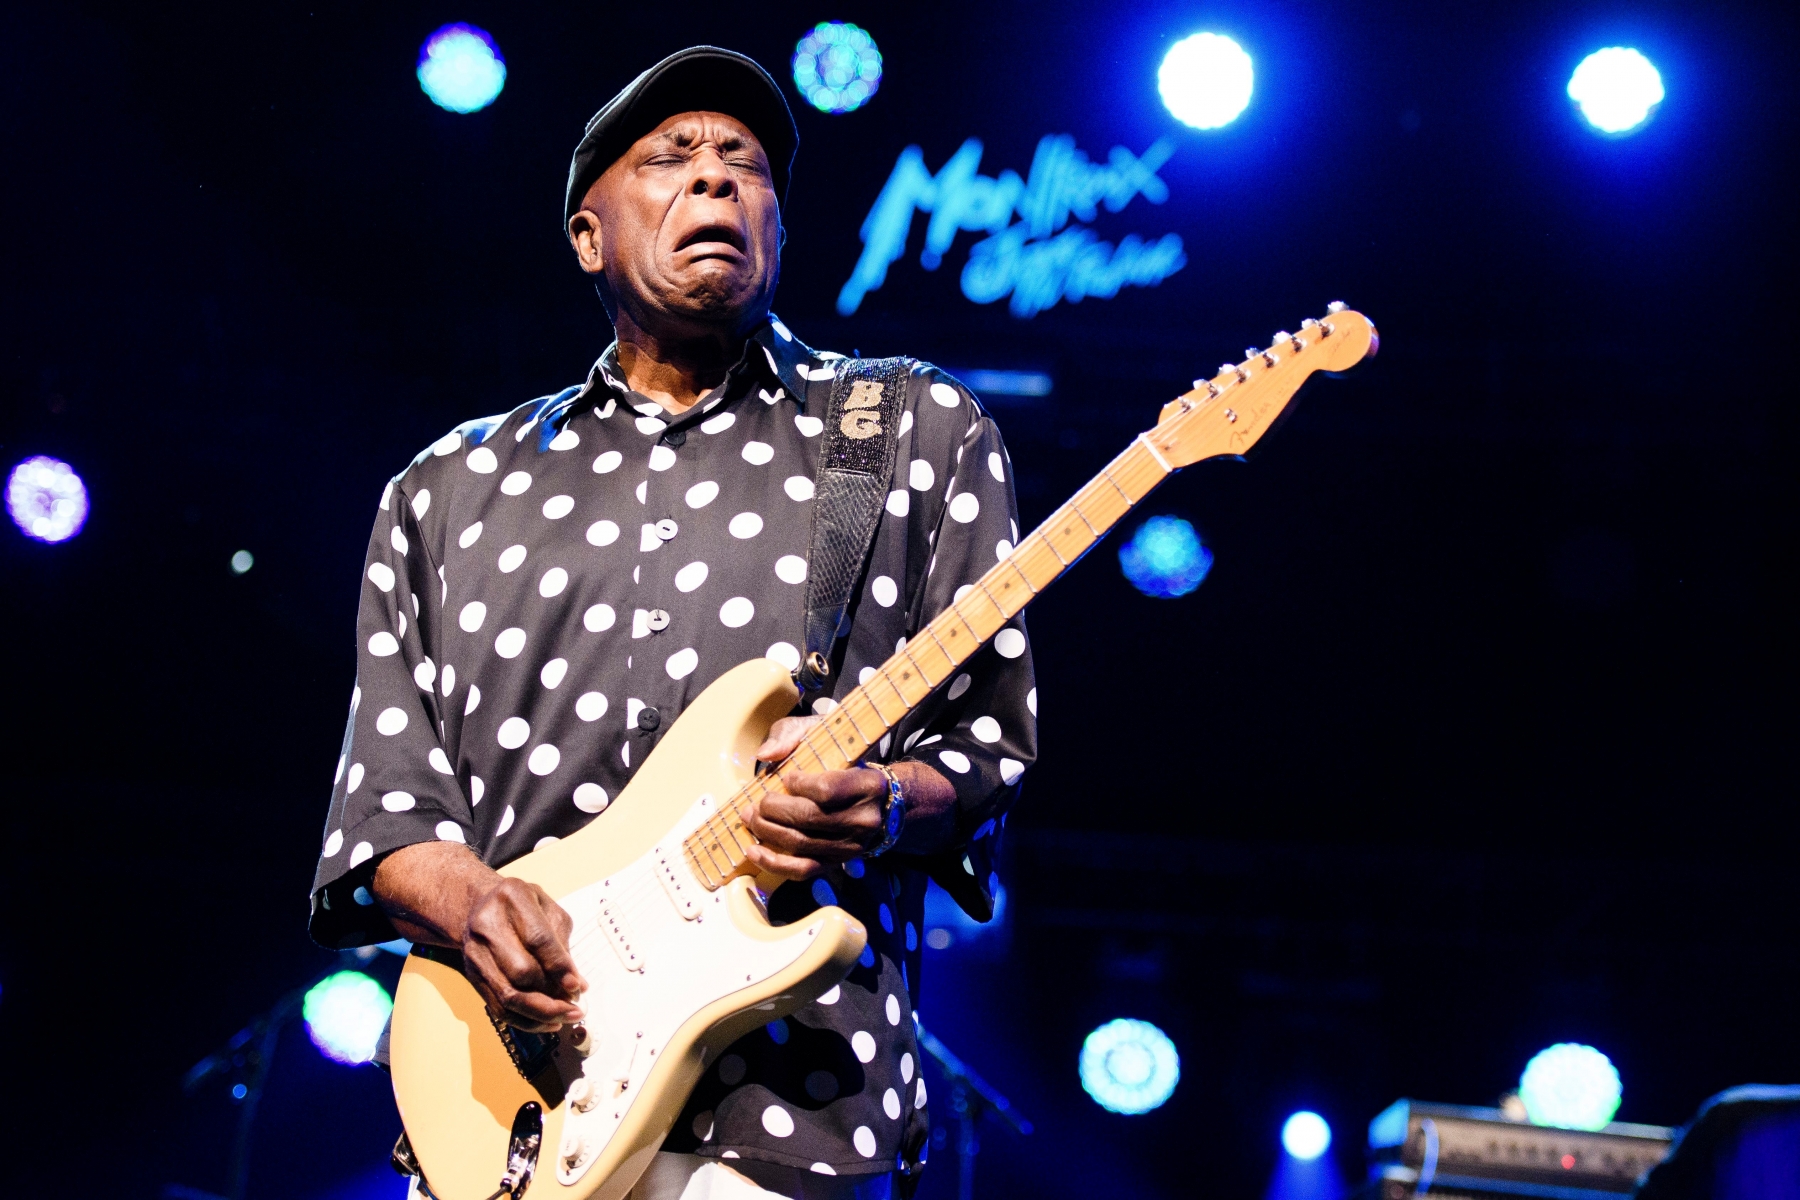 Buddy Guy performs on stage of the Auditorium Stravinski during the 50th Montreux Jazz Festival, in Montreux, Switzerland, Monday, July 4, 2016. (KEYSTONE/Manuel Lopez) SCHWEIZ MONTREUX JAZZ FESTIVAL 2016